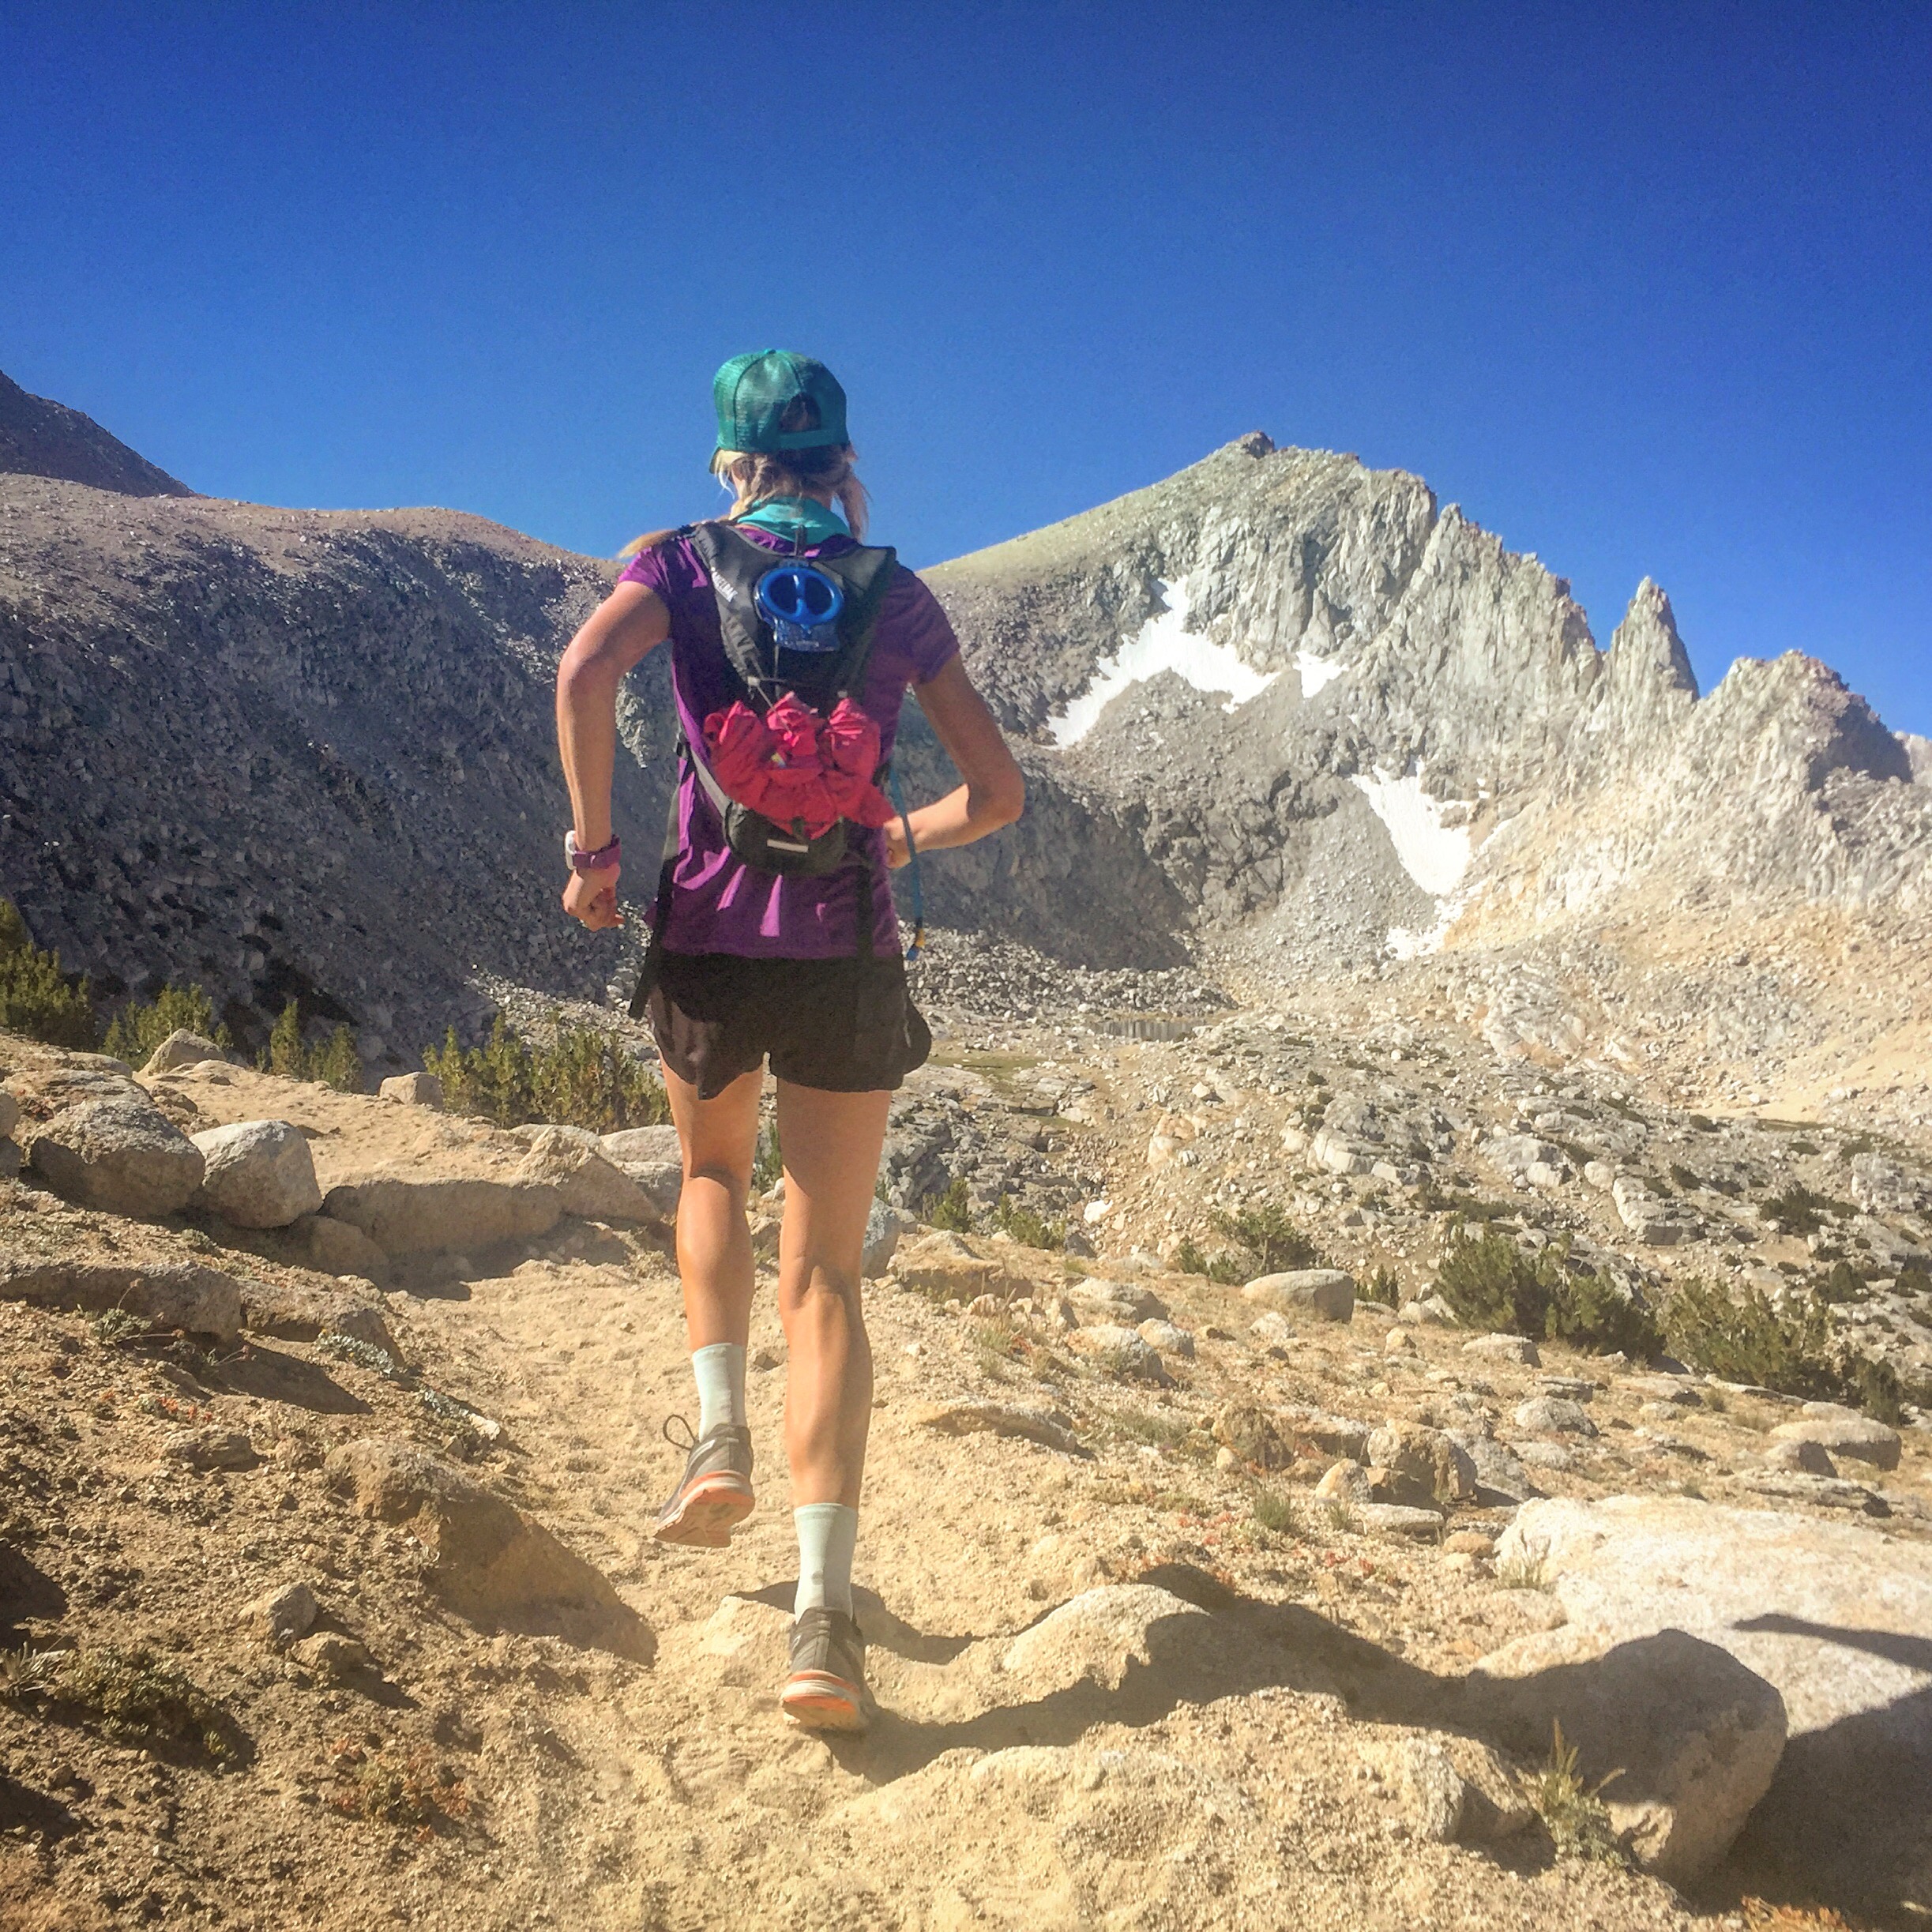 What It Takes To Run Across The Sierras: Morgan Just Ran 48 Miles Across The Sierras – Here’s How